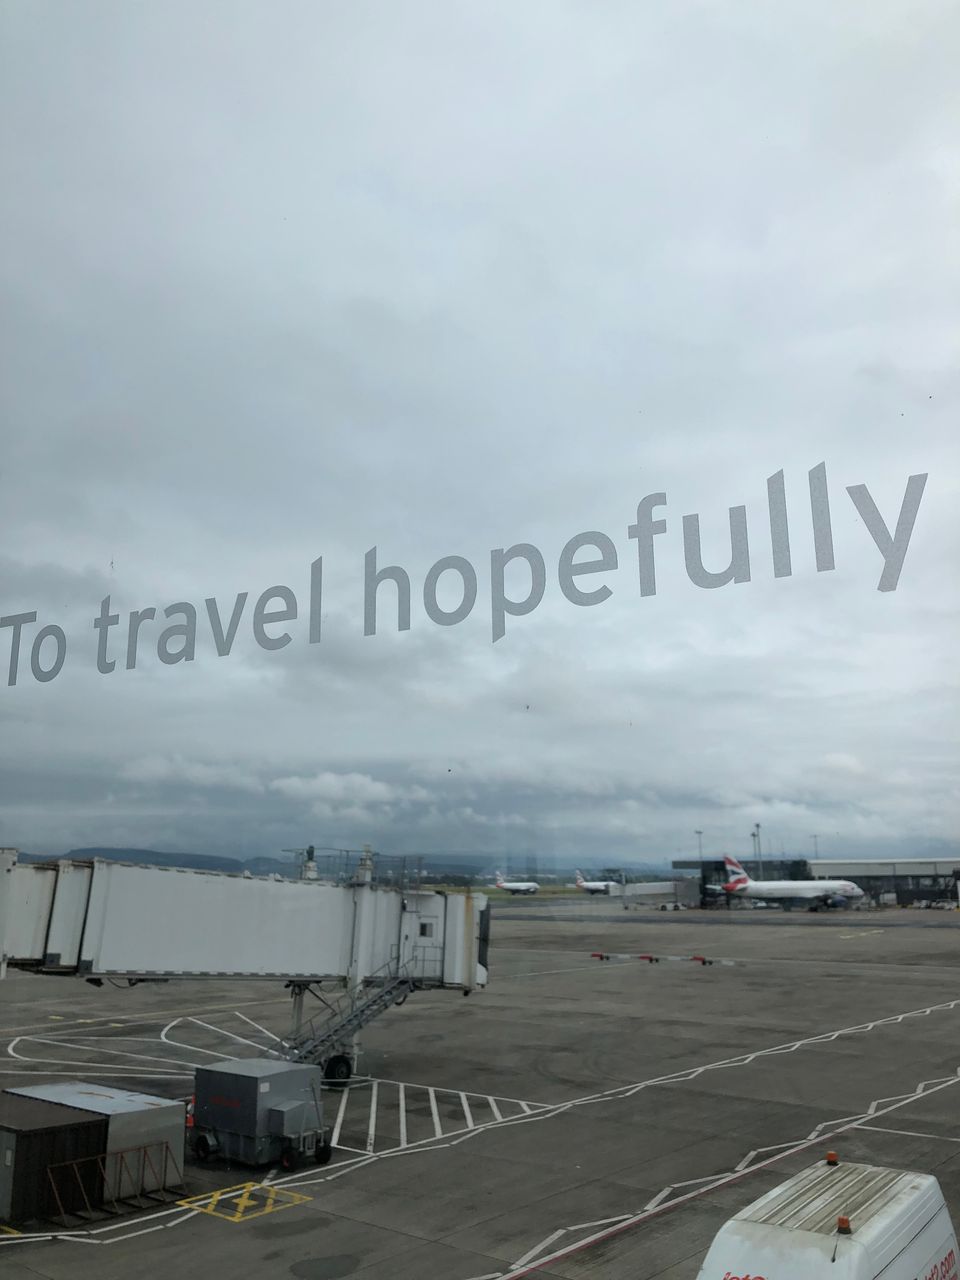 A grey day over Glasgow airport's airfield, glimpsed through a window on which the words "To travel hopefully" appear.